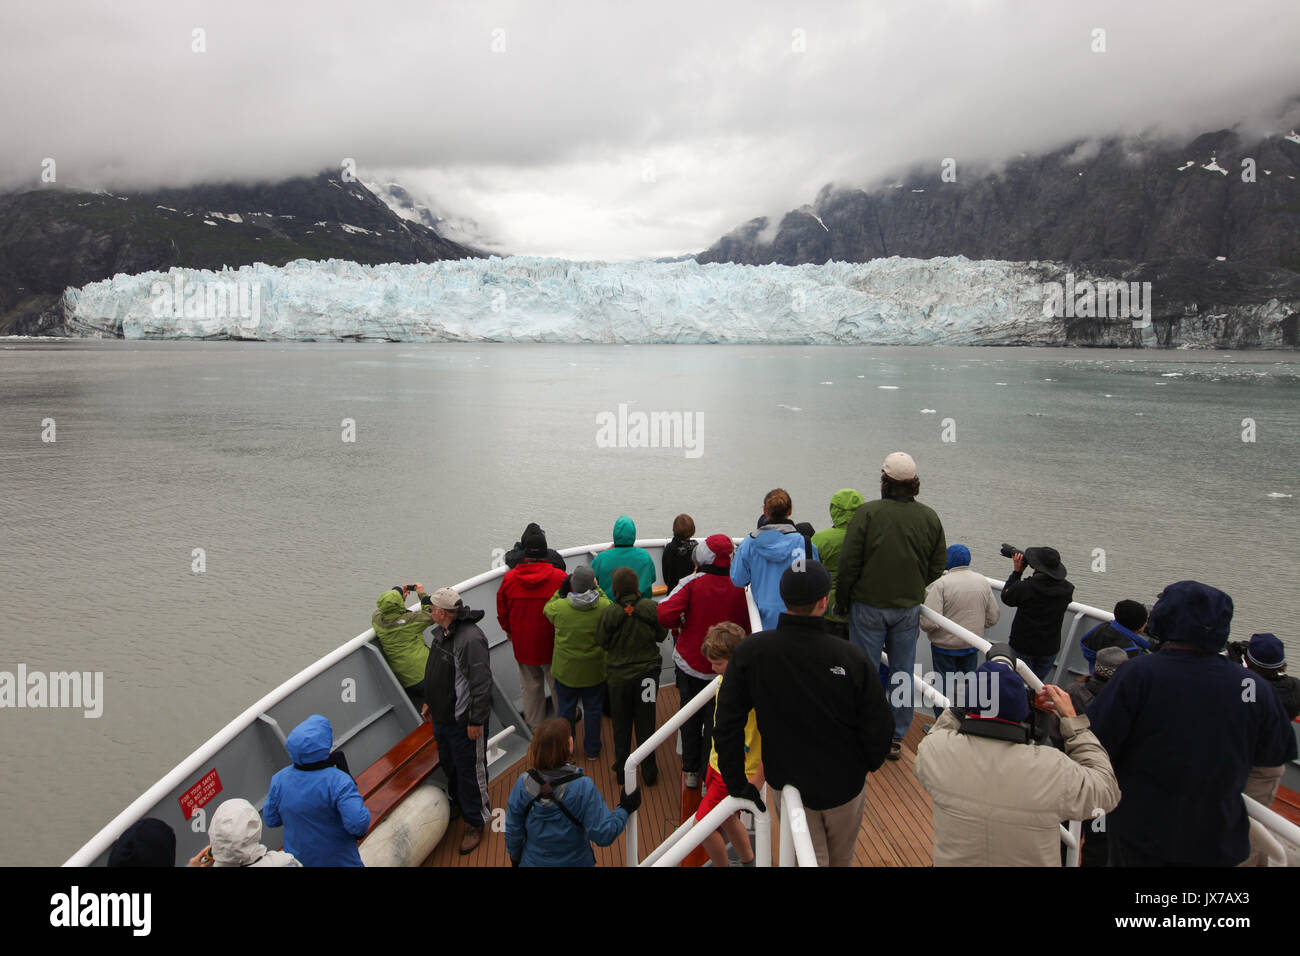 During an expedition on a cruise ship, passengers observe and photograph a nearby glacier. Stock Photo